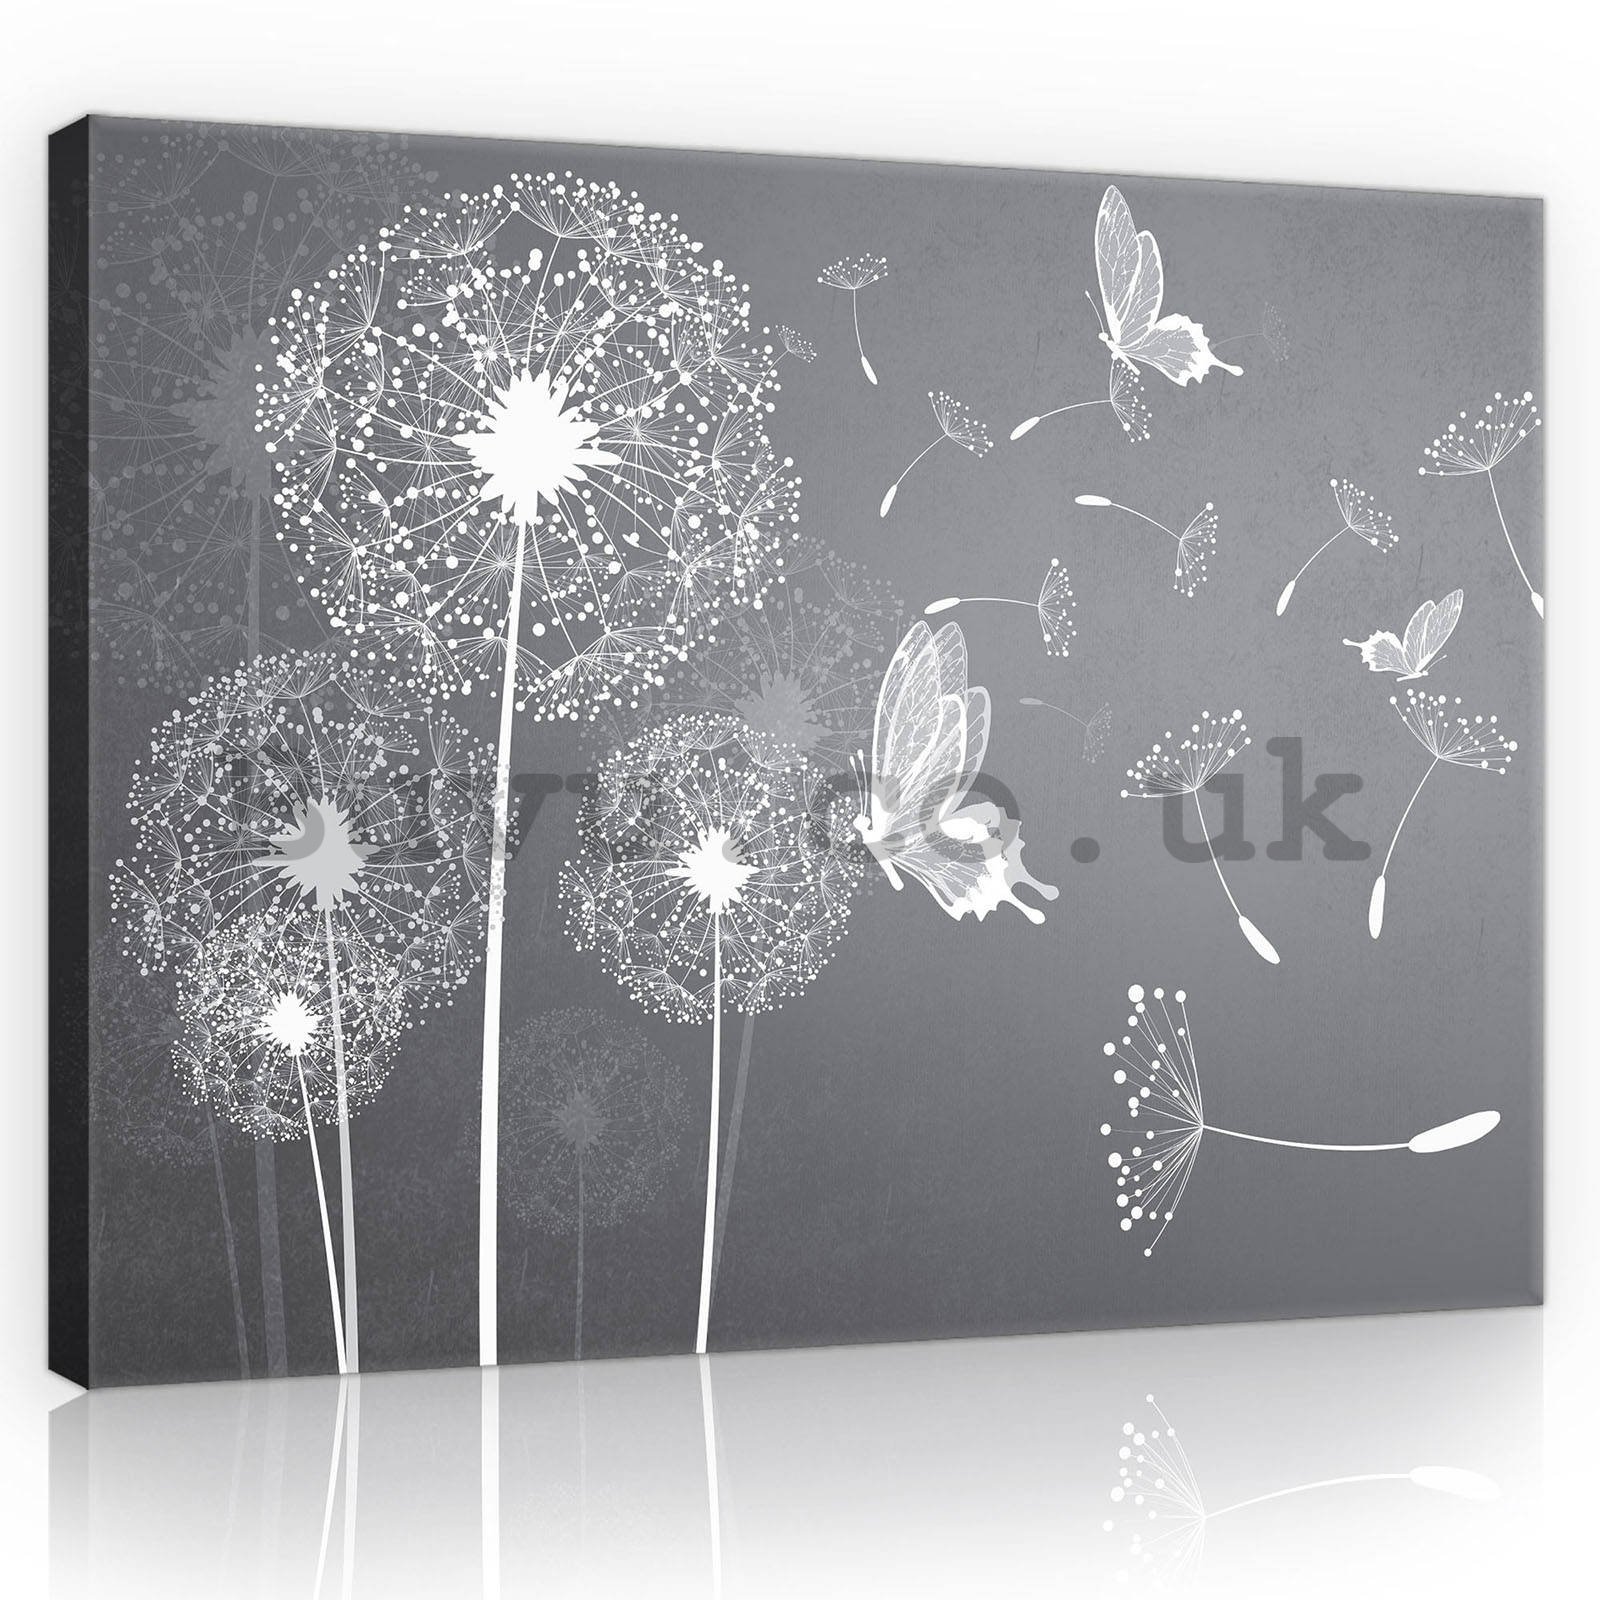 Painting on canvas: Dandelions and butterflies - 80x60 cm